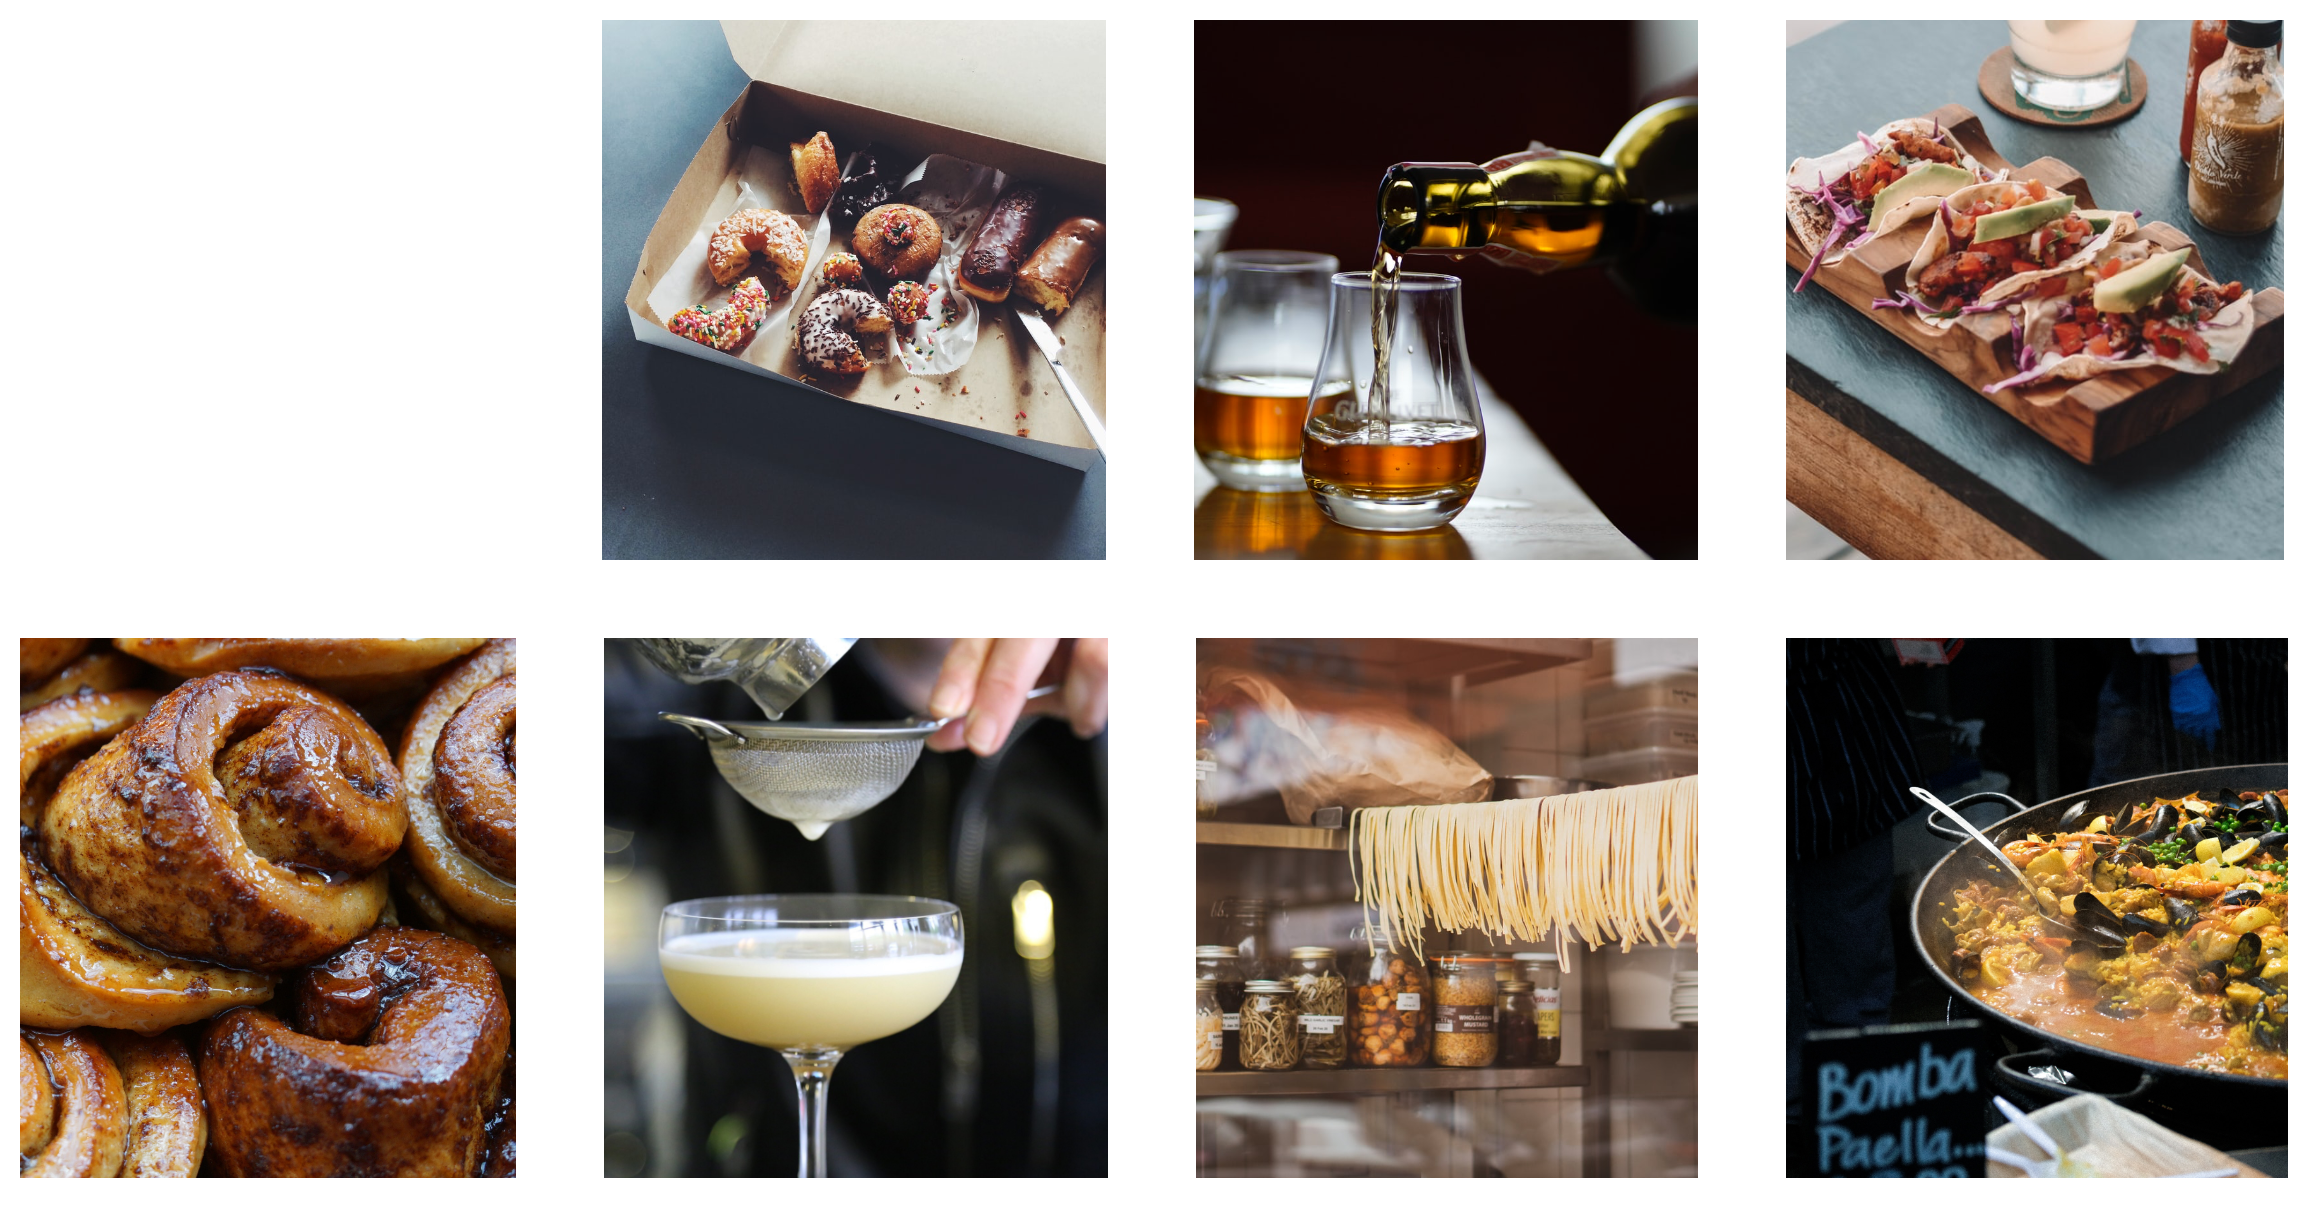 a collage of 7 food images, from top left to bottom right, donuts in a box, whiskey being poured into a glass, colourful Mexican tacos, fresh cinamon buns, a pornstar martini being strained, fresh pasta drying on a rack, and a fragrant muscle broth in a large pan